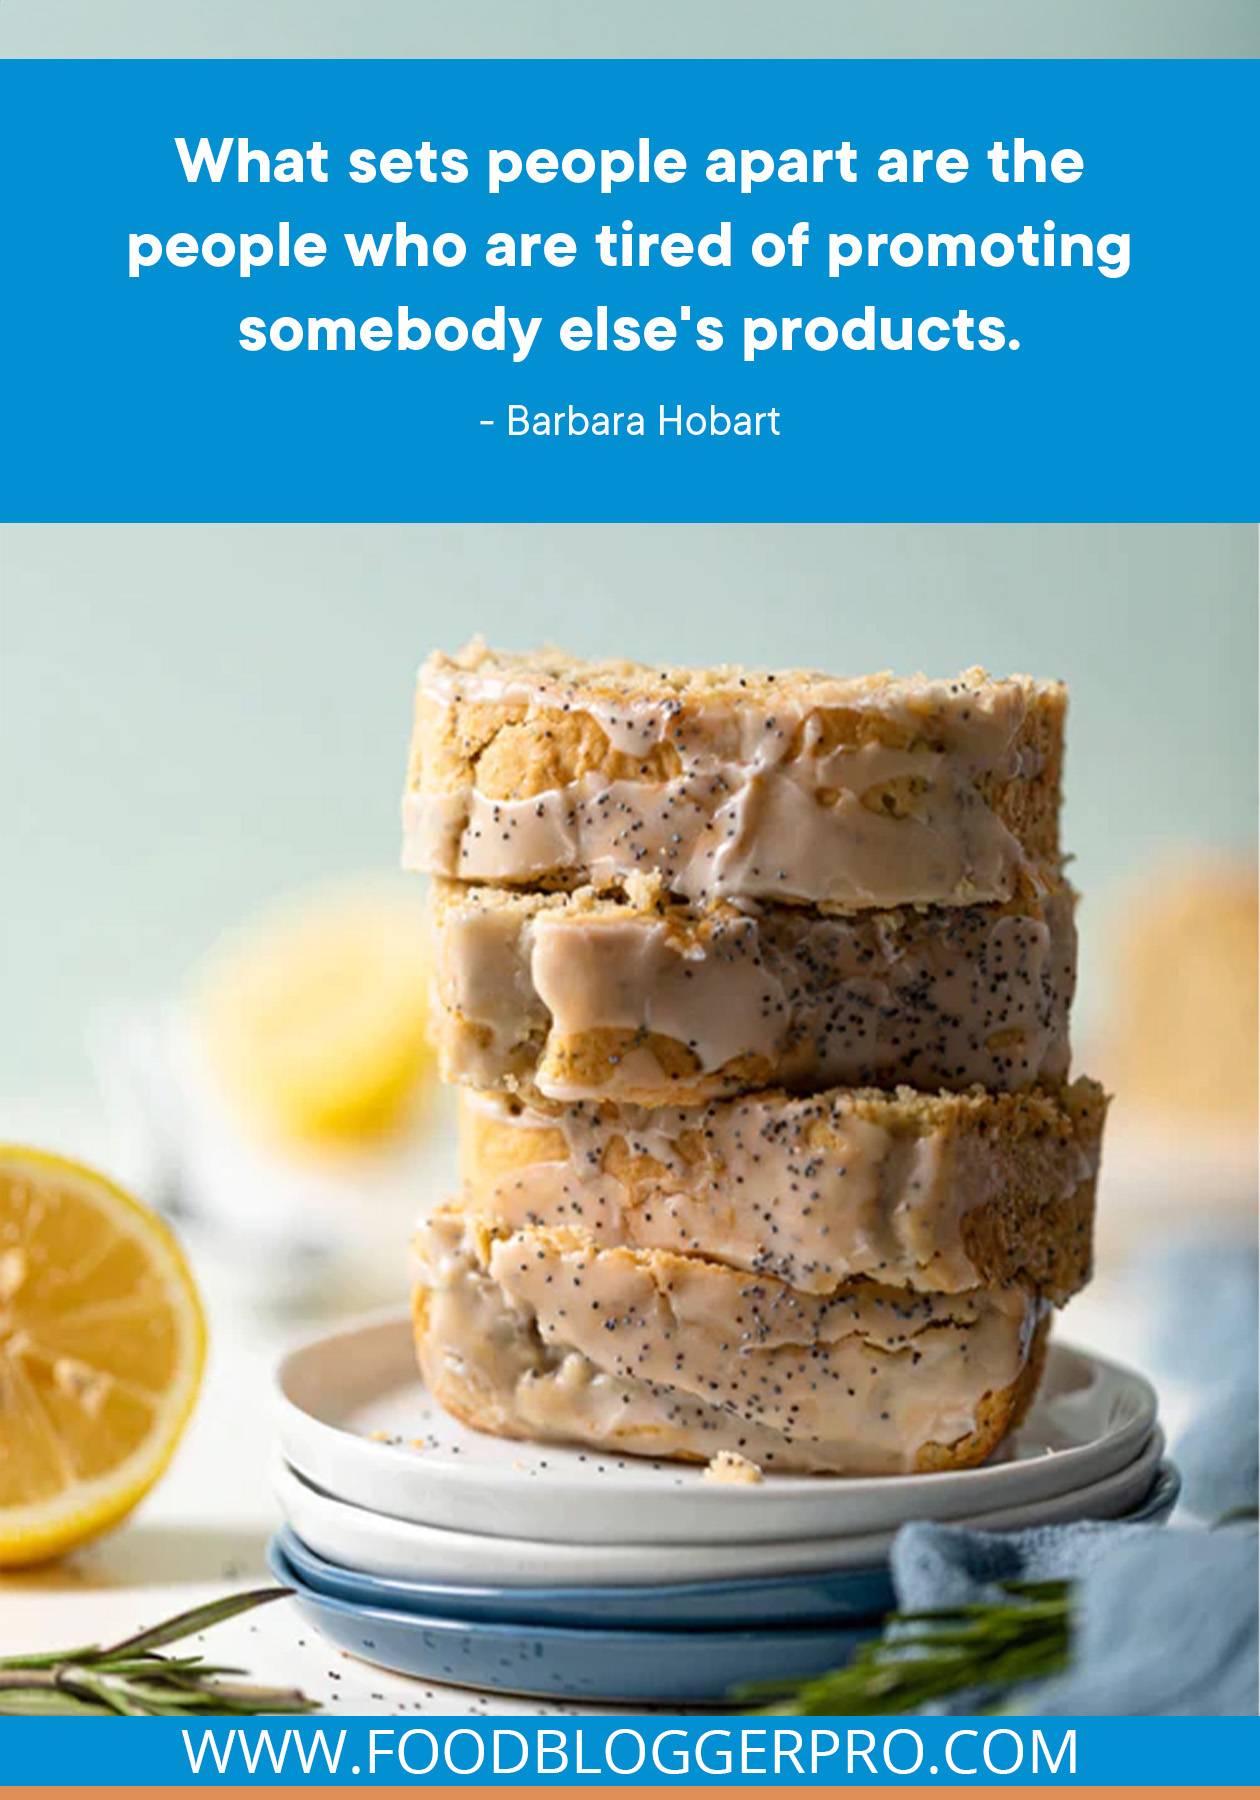 A photograph of a stack of lemon poppyseed bread slices with this quote from Barbara Hobart's episode of The Food Blogger Pro Podcast: "What sets people apart are the people who are tired of promoting somebody else's products."